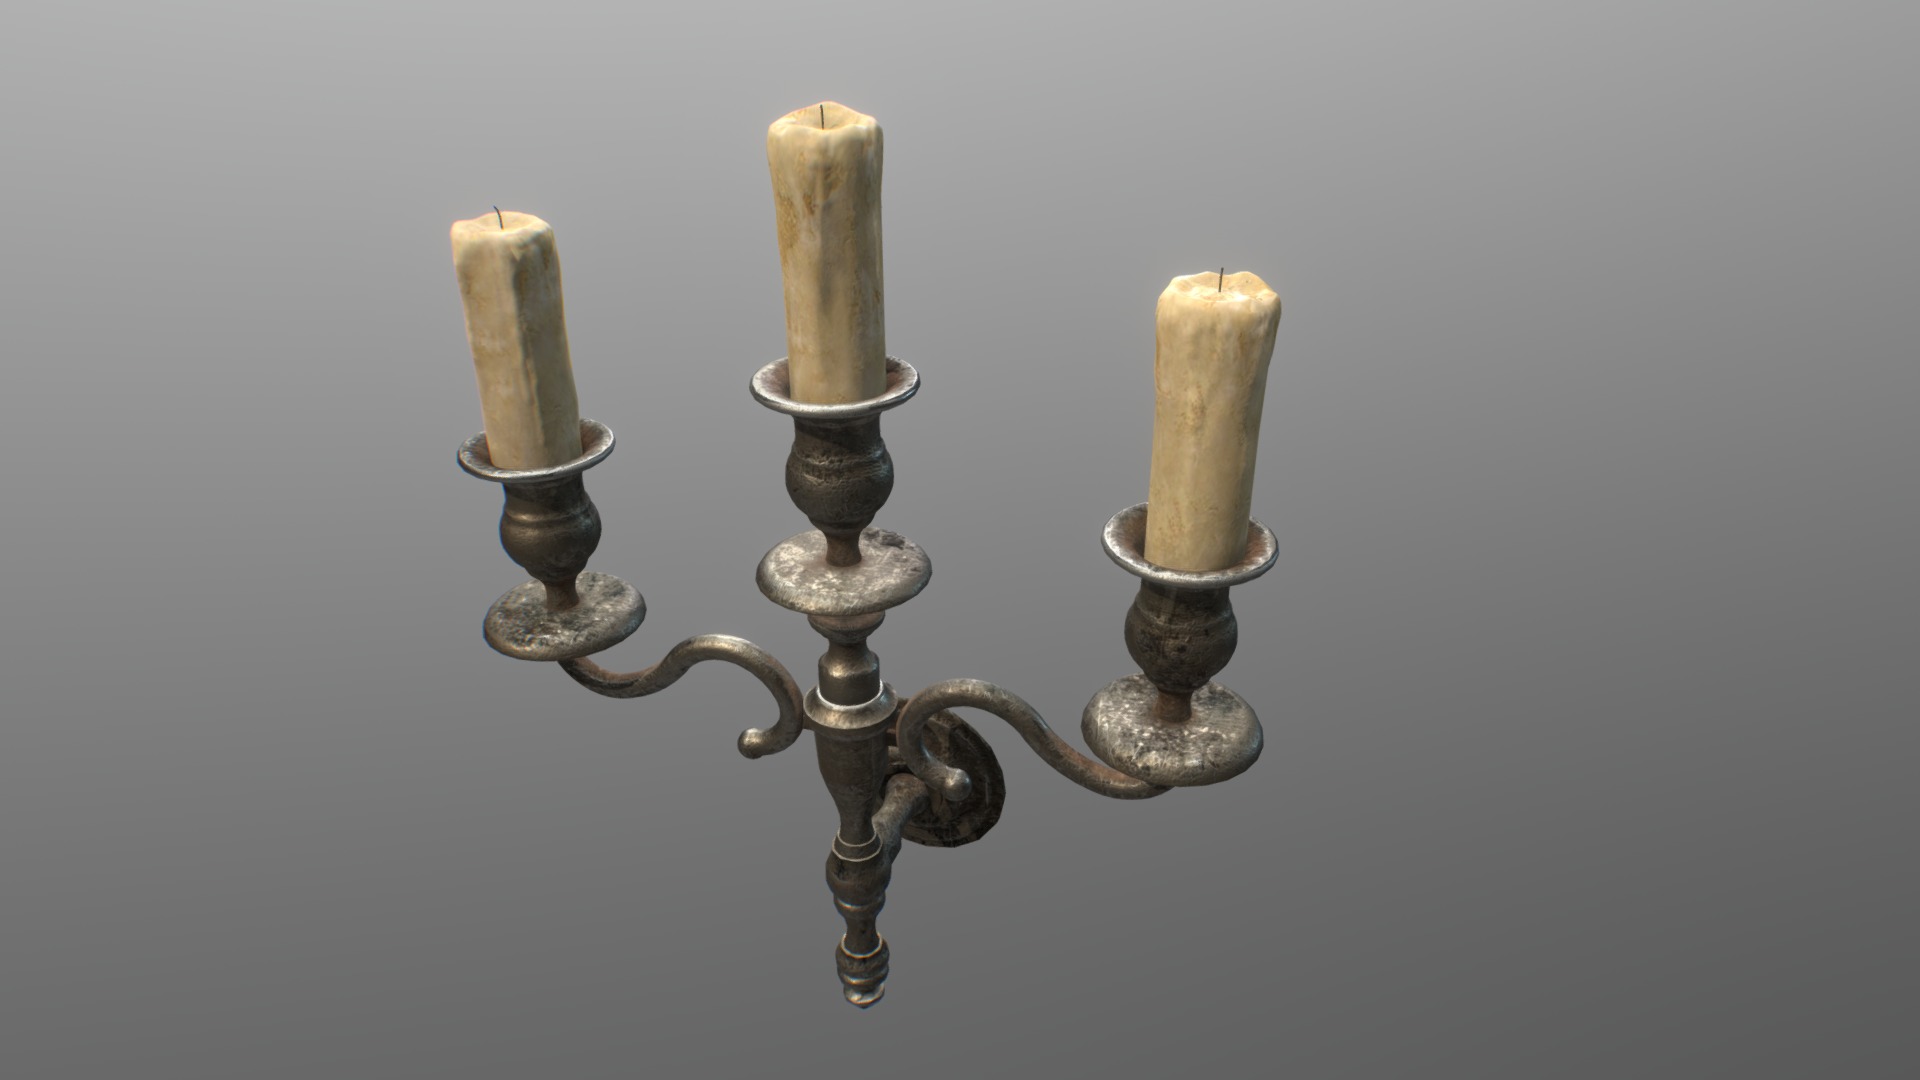 3D model Old wall candle - This is a 3D model of the Old wall candle. The 3D model is about a few metal objects.